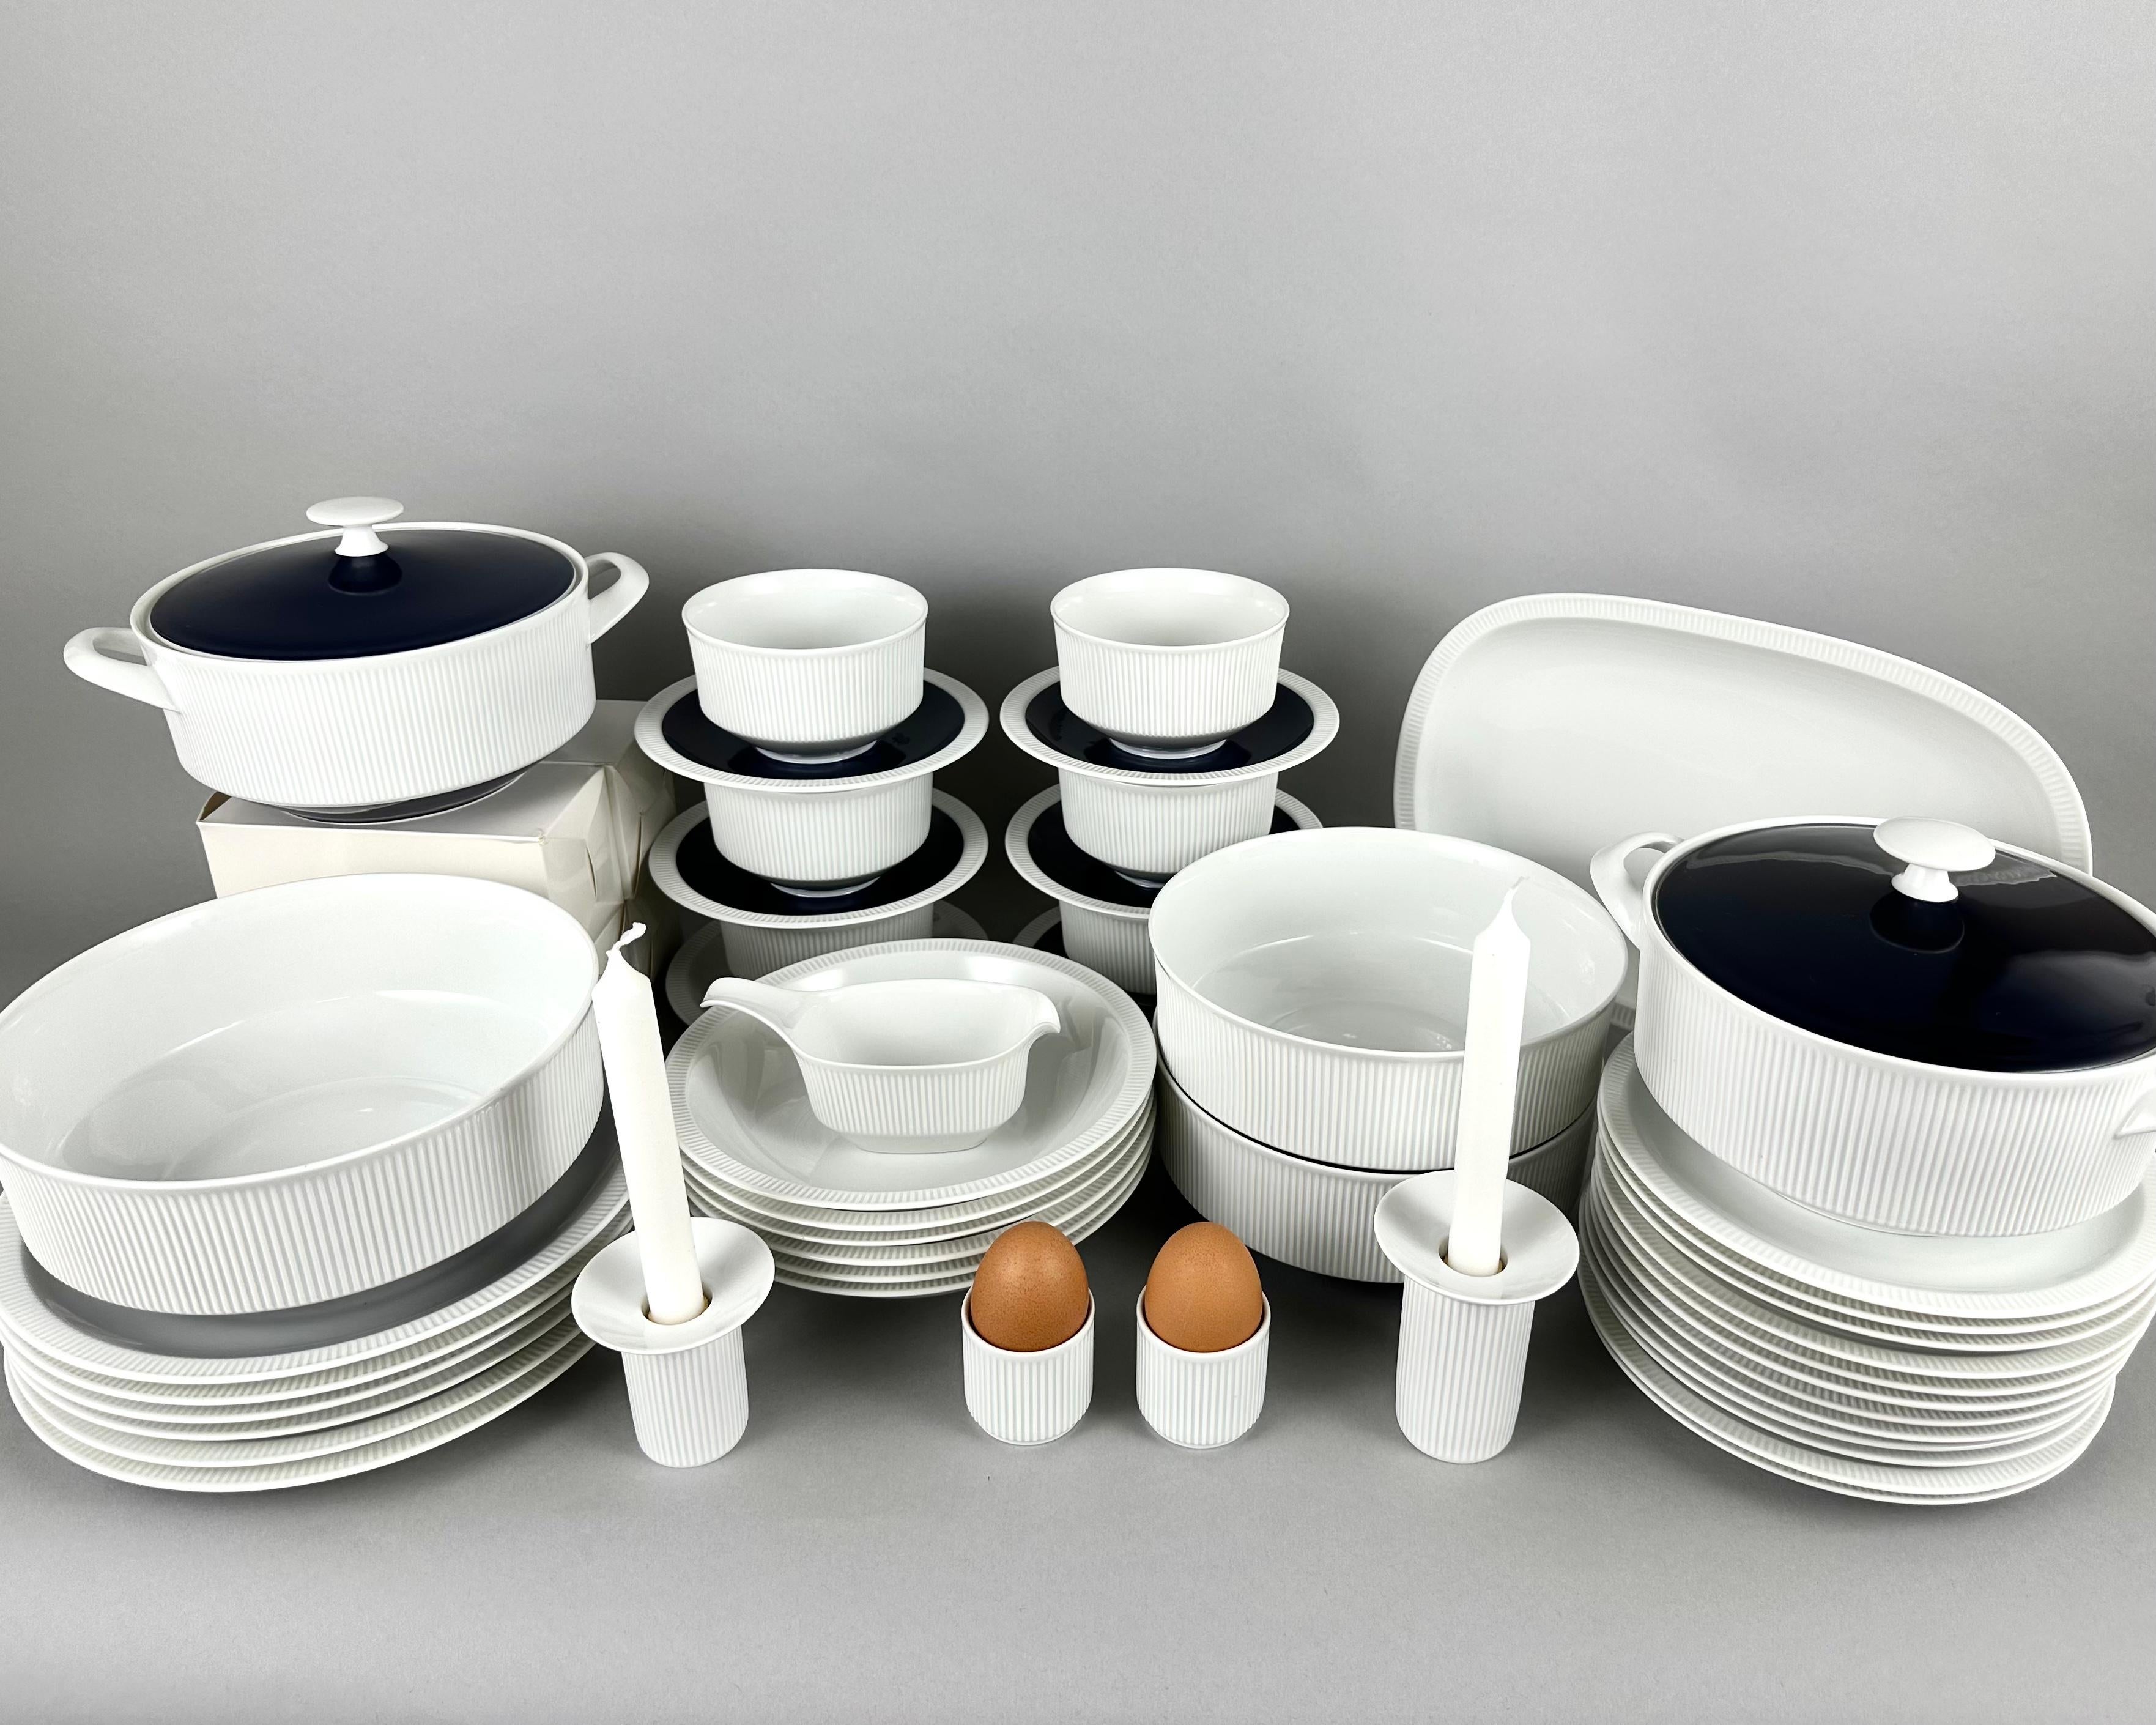 Set of coffee and dinner ware service vintage by Arzberg, 1970s. Germany.

White porcelain with relief stripes, dark blue lids and saucers.

It consists of:

 1. Turin - (14 cm) - 2 pcs.

 2. Bouillon bowls with saucers - 6 pcs.

 3. Large salad